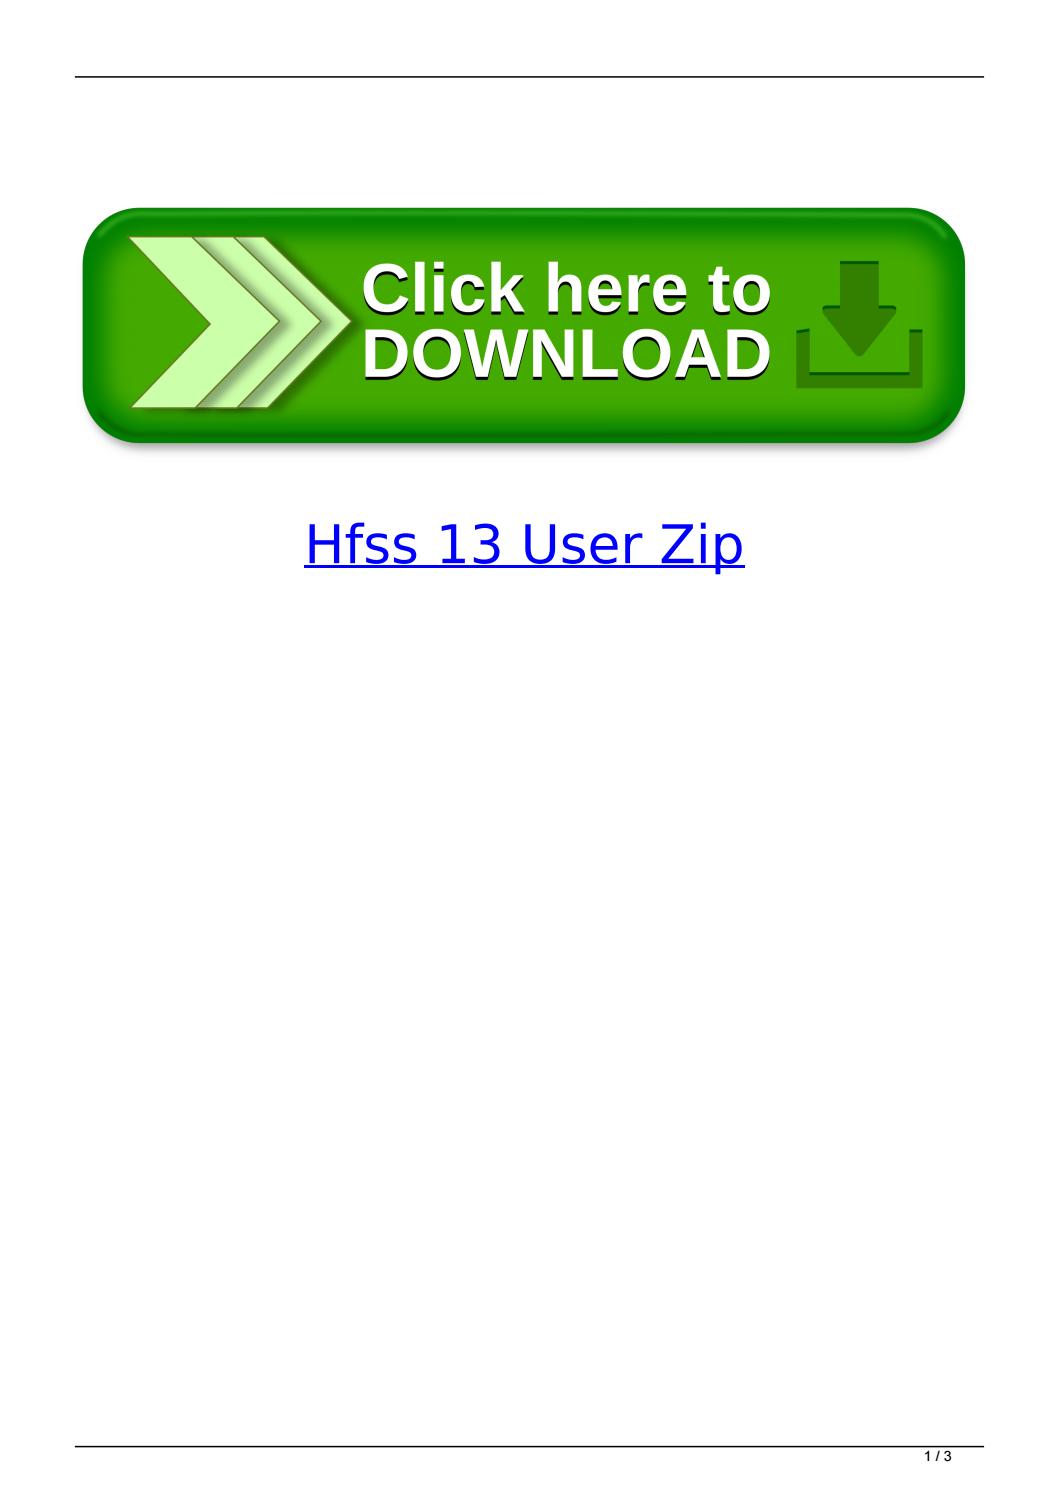 Hfss software free download